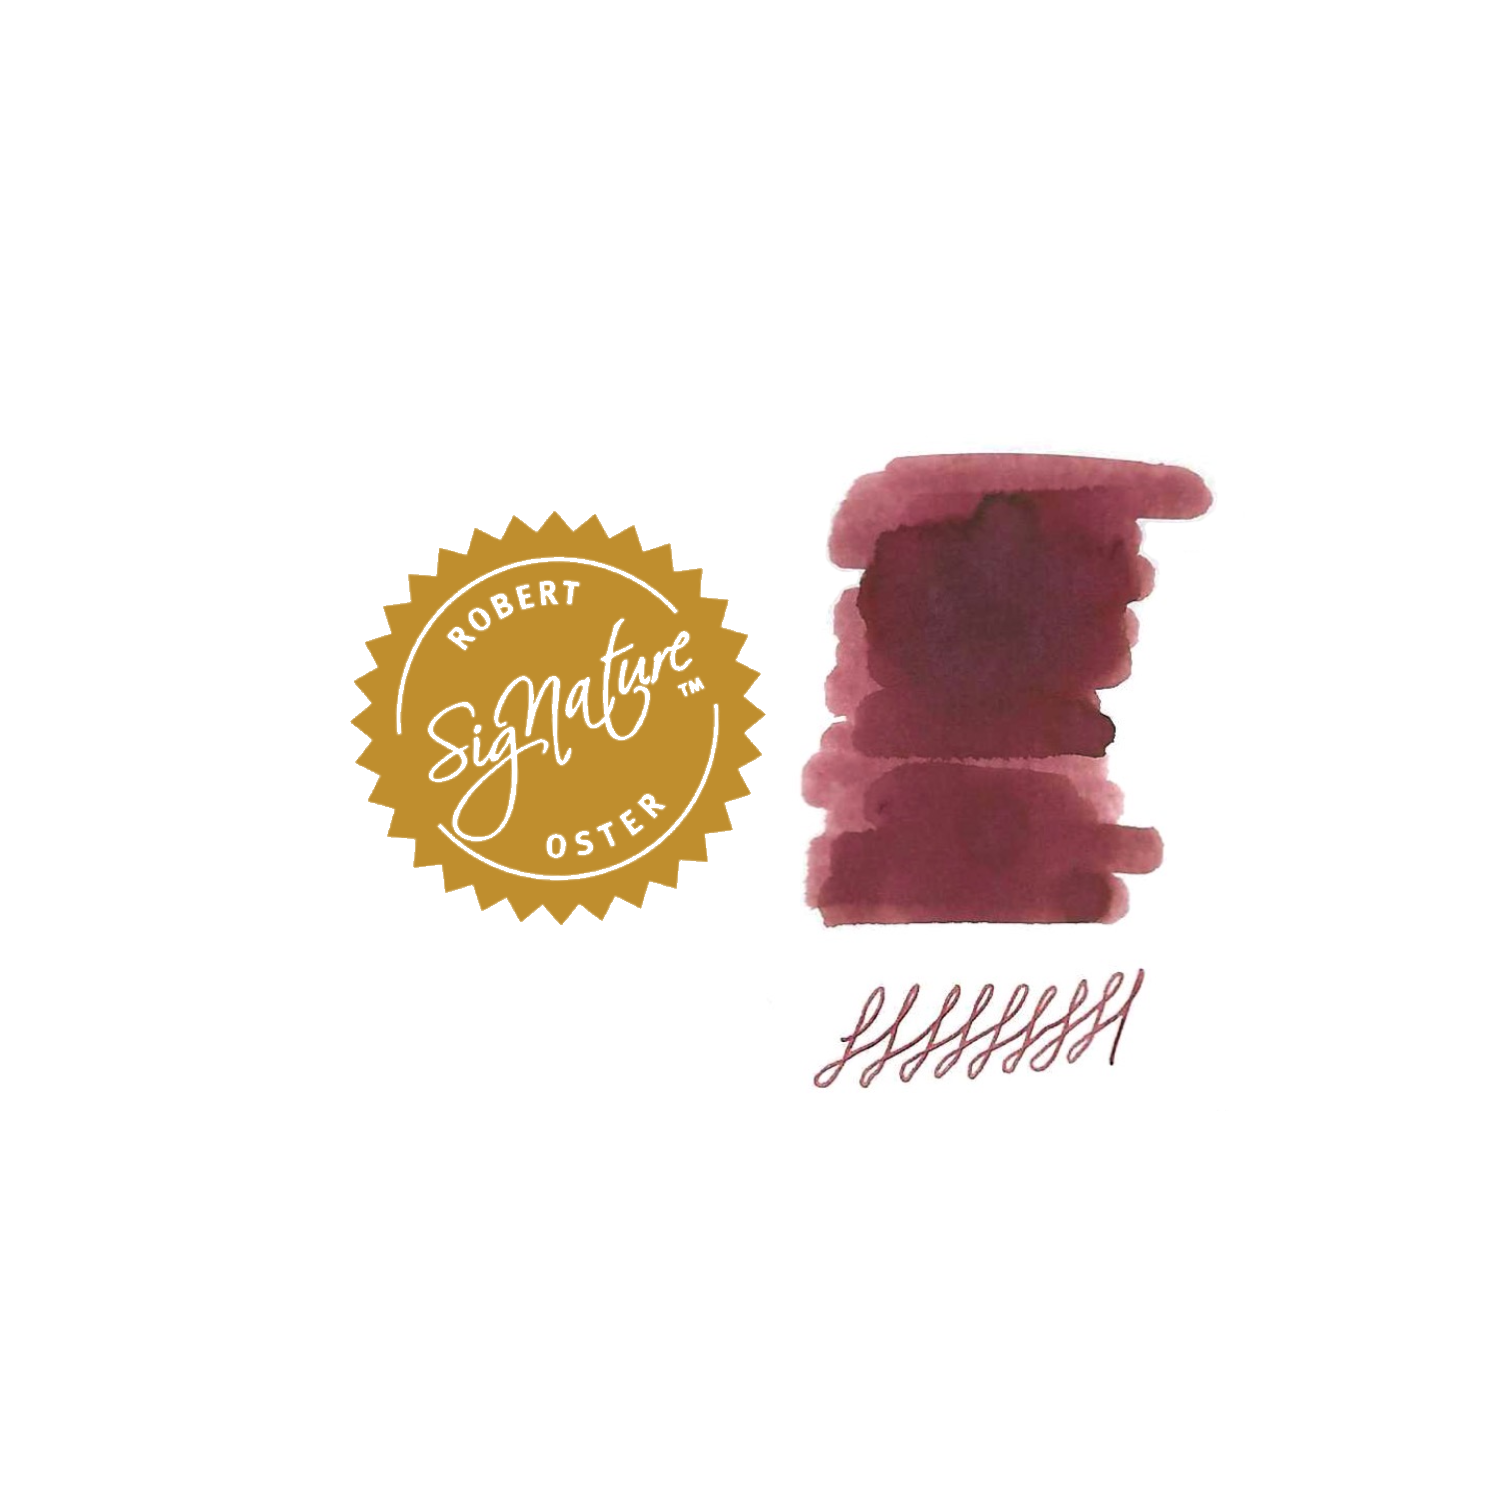 74. Frankly Scarlet * Robert Oster Signature ink